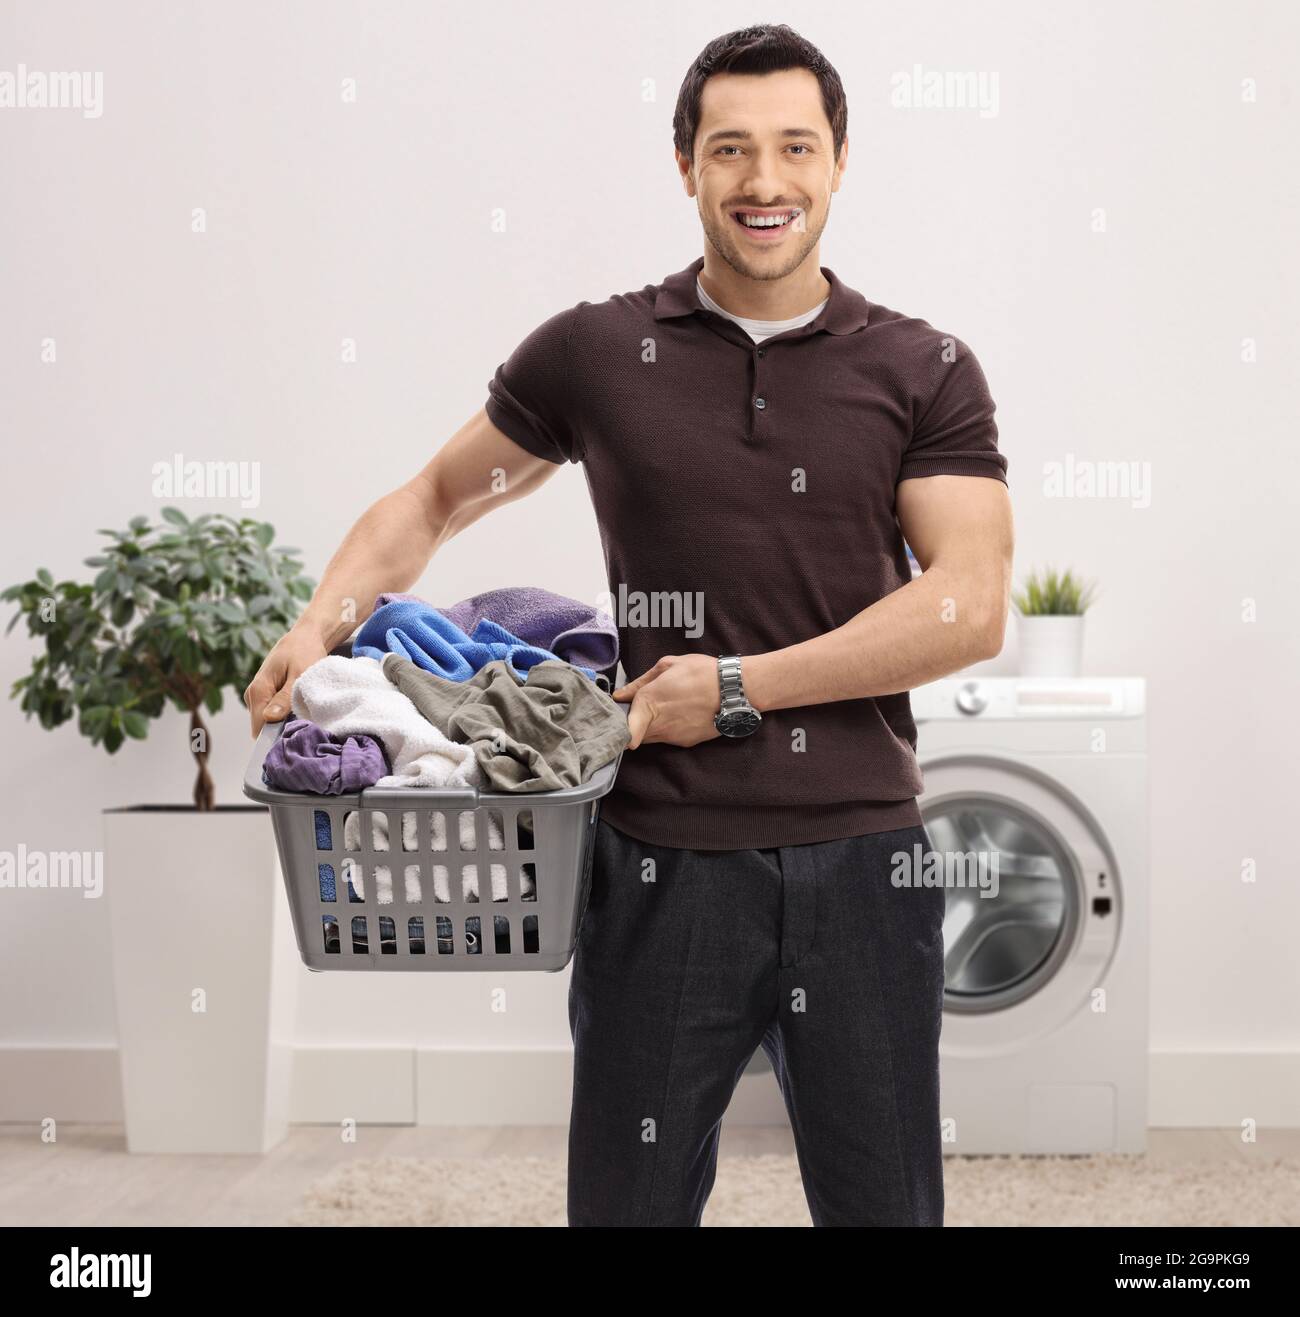 Smiling young man with a laundry basket full of clothes standing in a bathroom Stock Photo